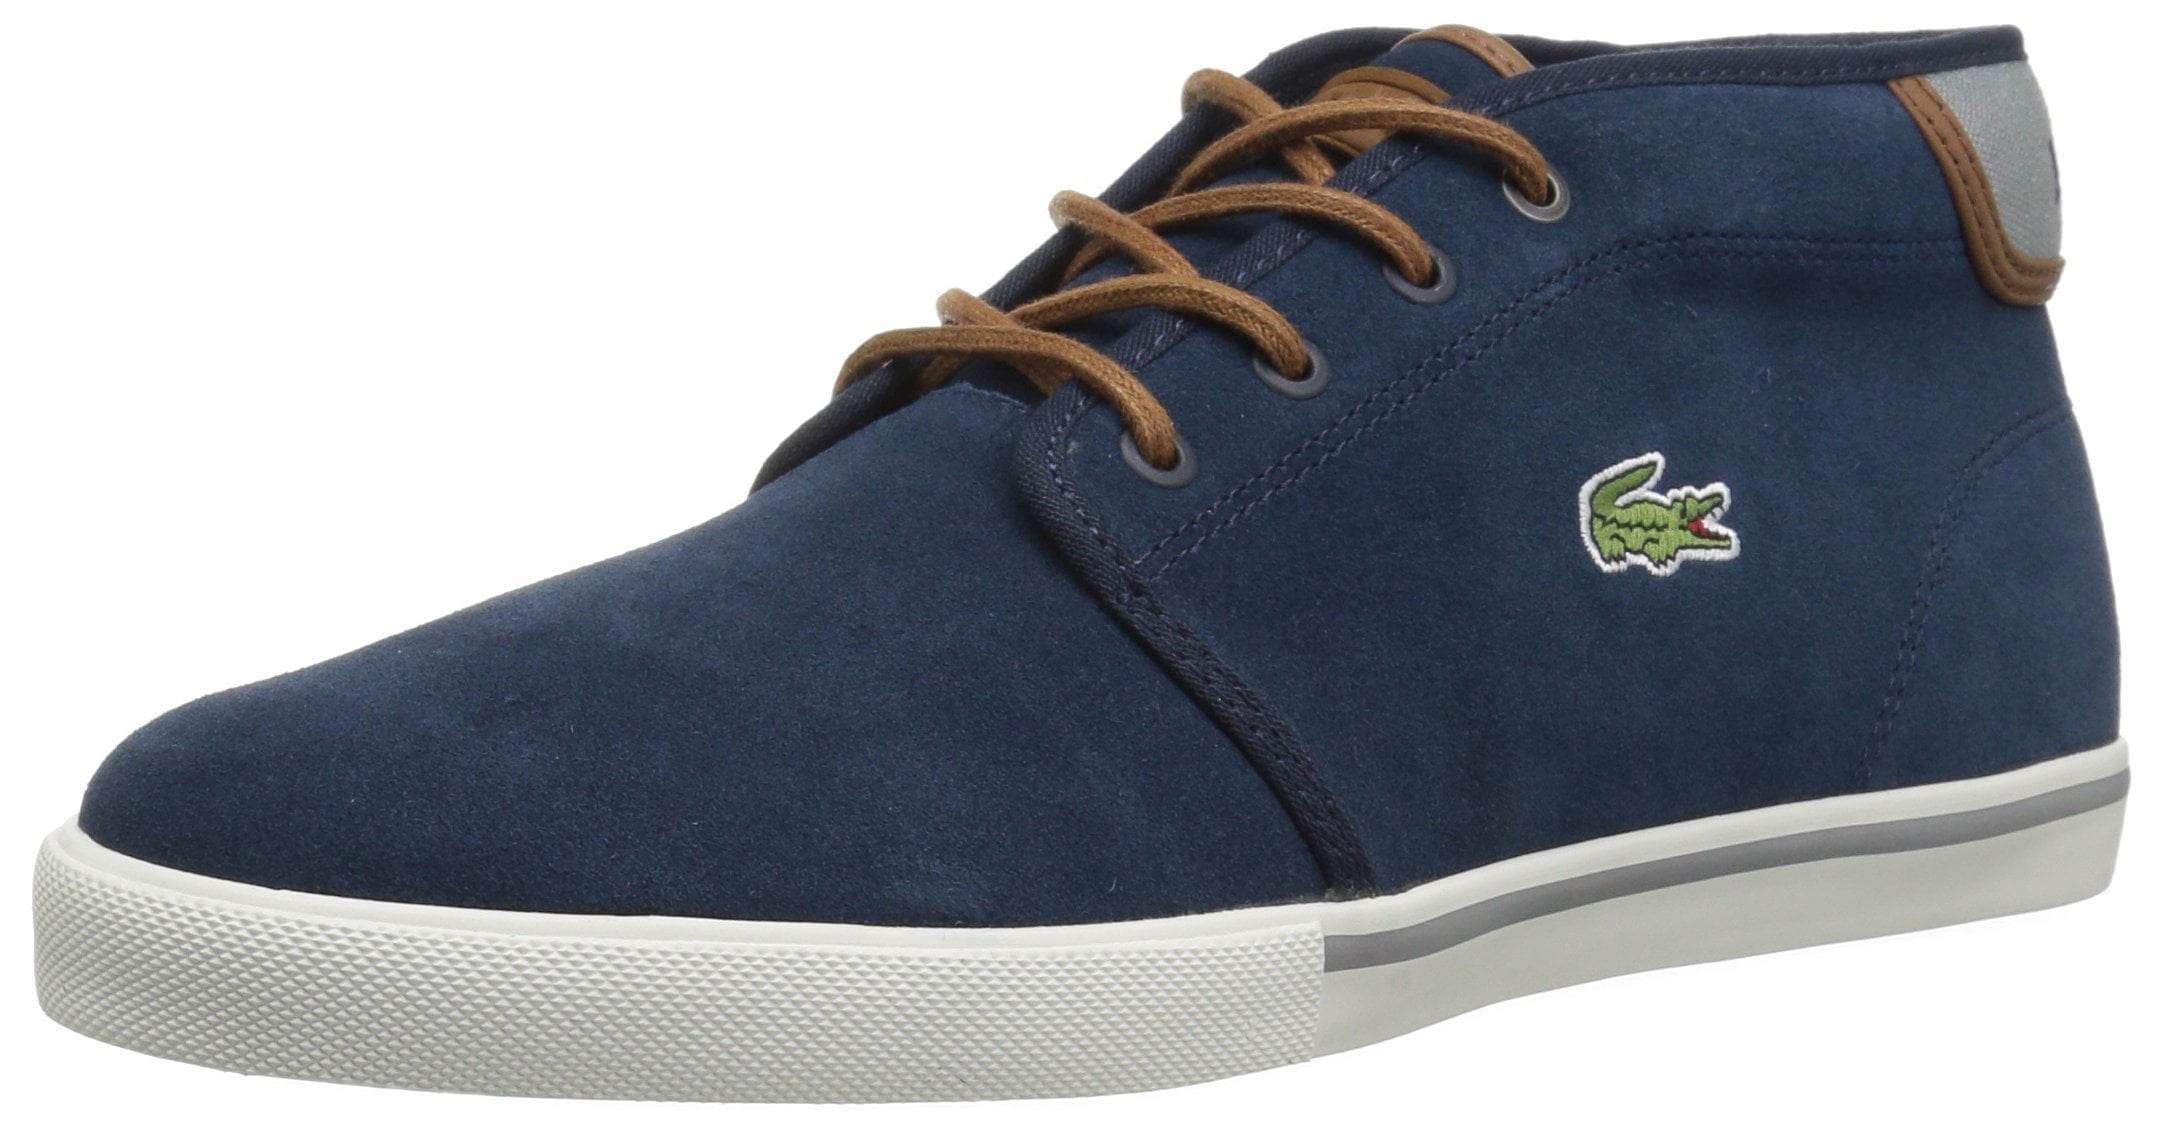 lacoste ampthill tan